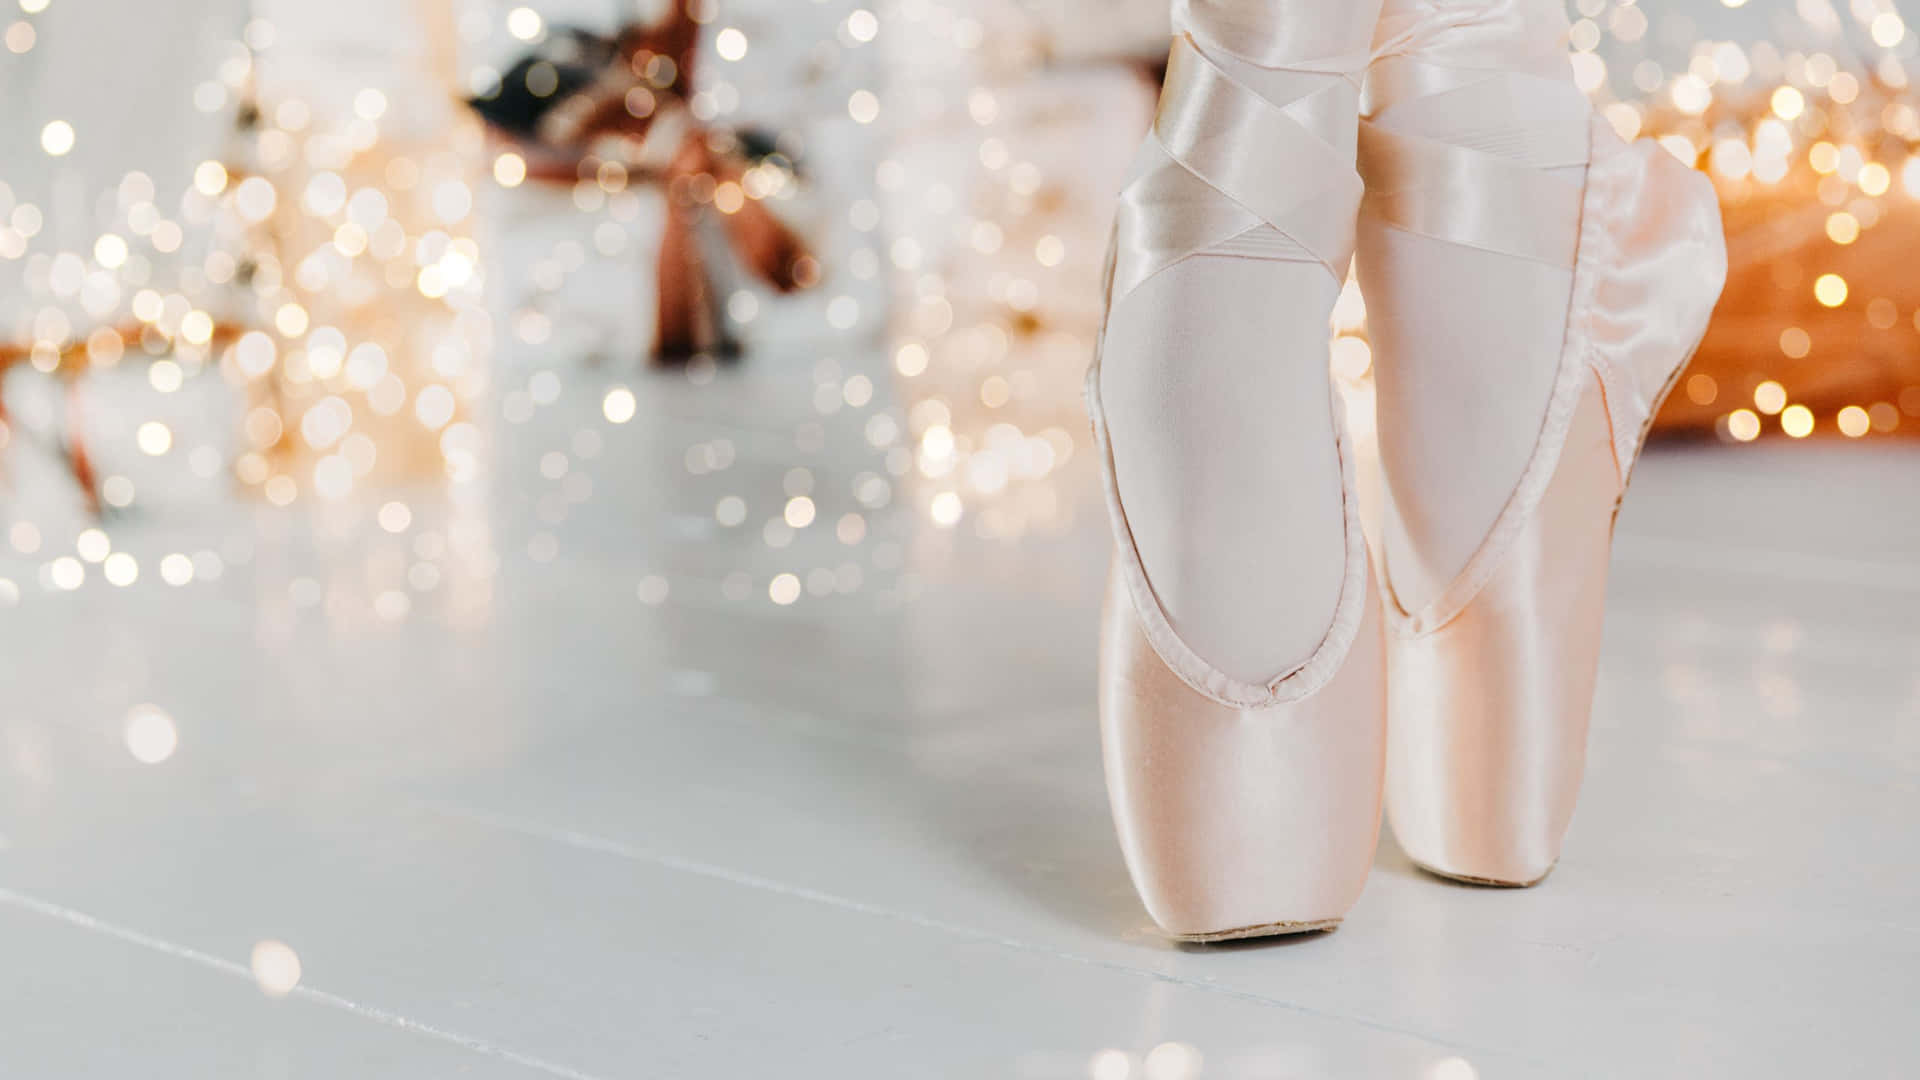 Pointe Shoes Lights Background